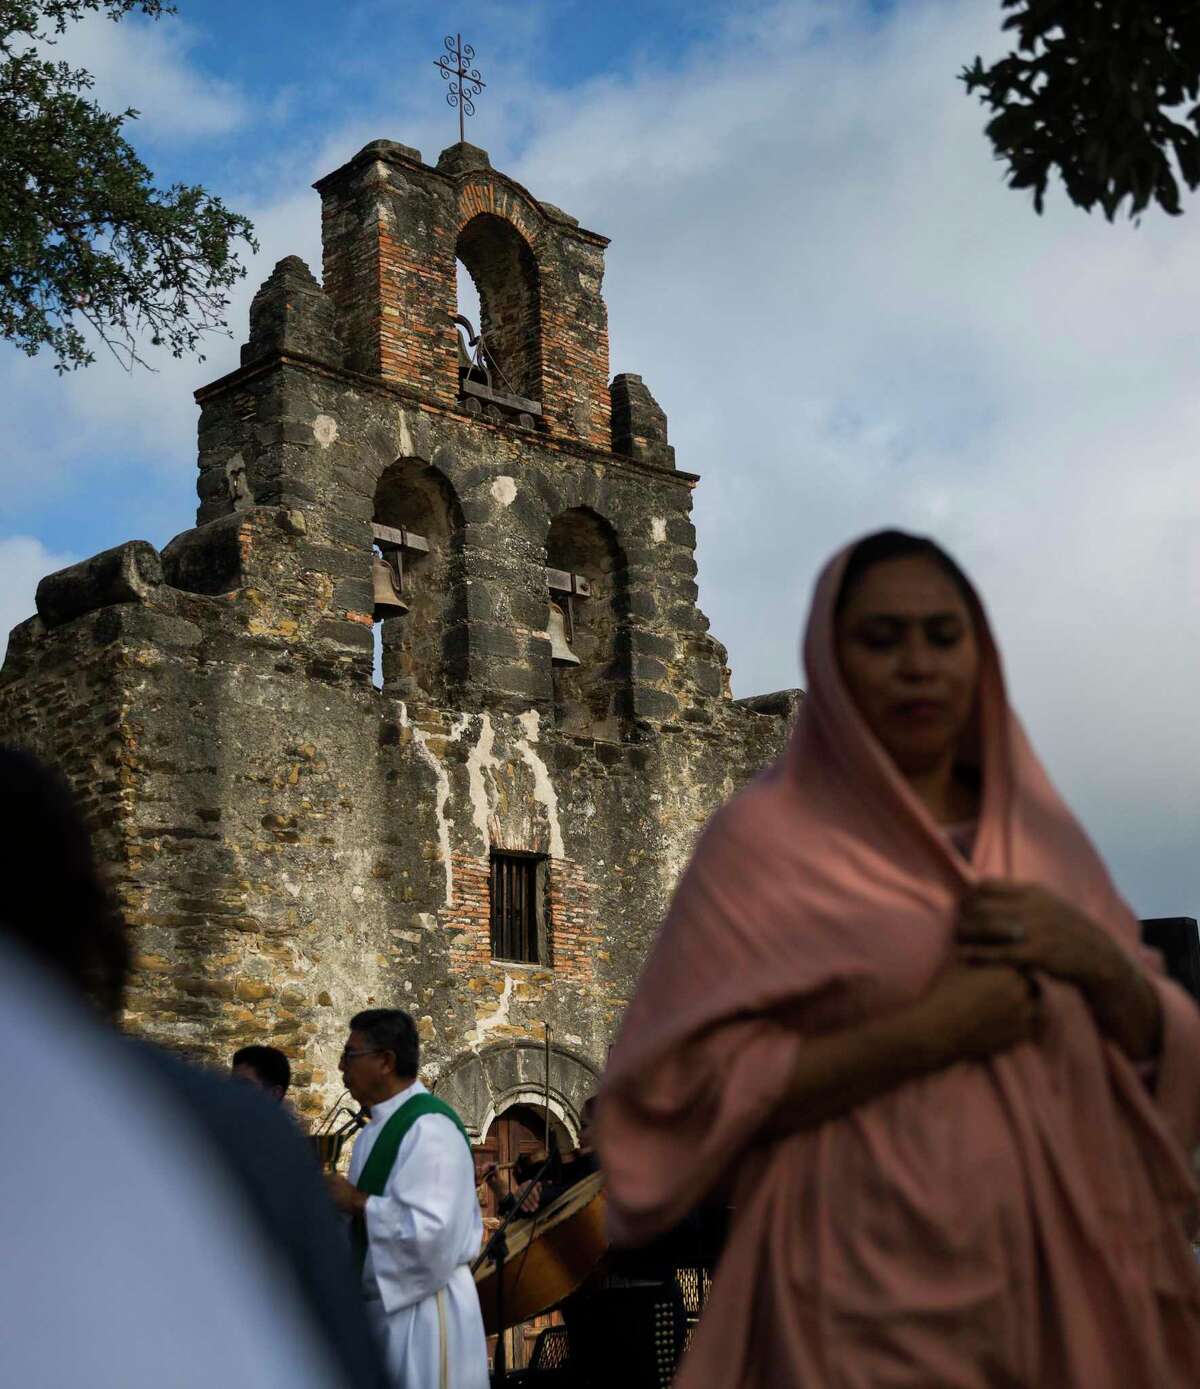 Deacon Alberto Rodriguez, left, gives mass attendees sacrament during the "El Camino de San Antonio: Caring for Creation" mariachi mass at Mission Espada in San Antonio on Sunday, Sept. 8, 2019. After the mass Archbishop Gustavo Garc’a-Siller, not pictured, led a procession on a 1.5-mile walk to Mission San Juan.